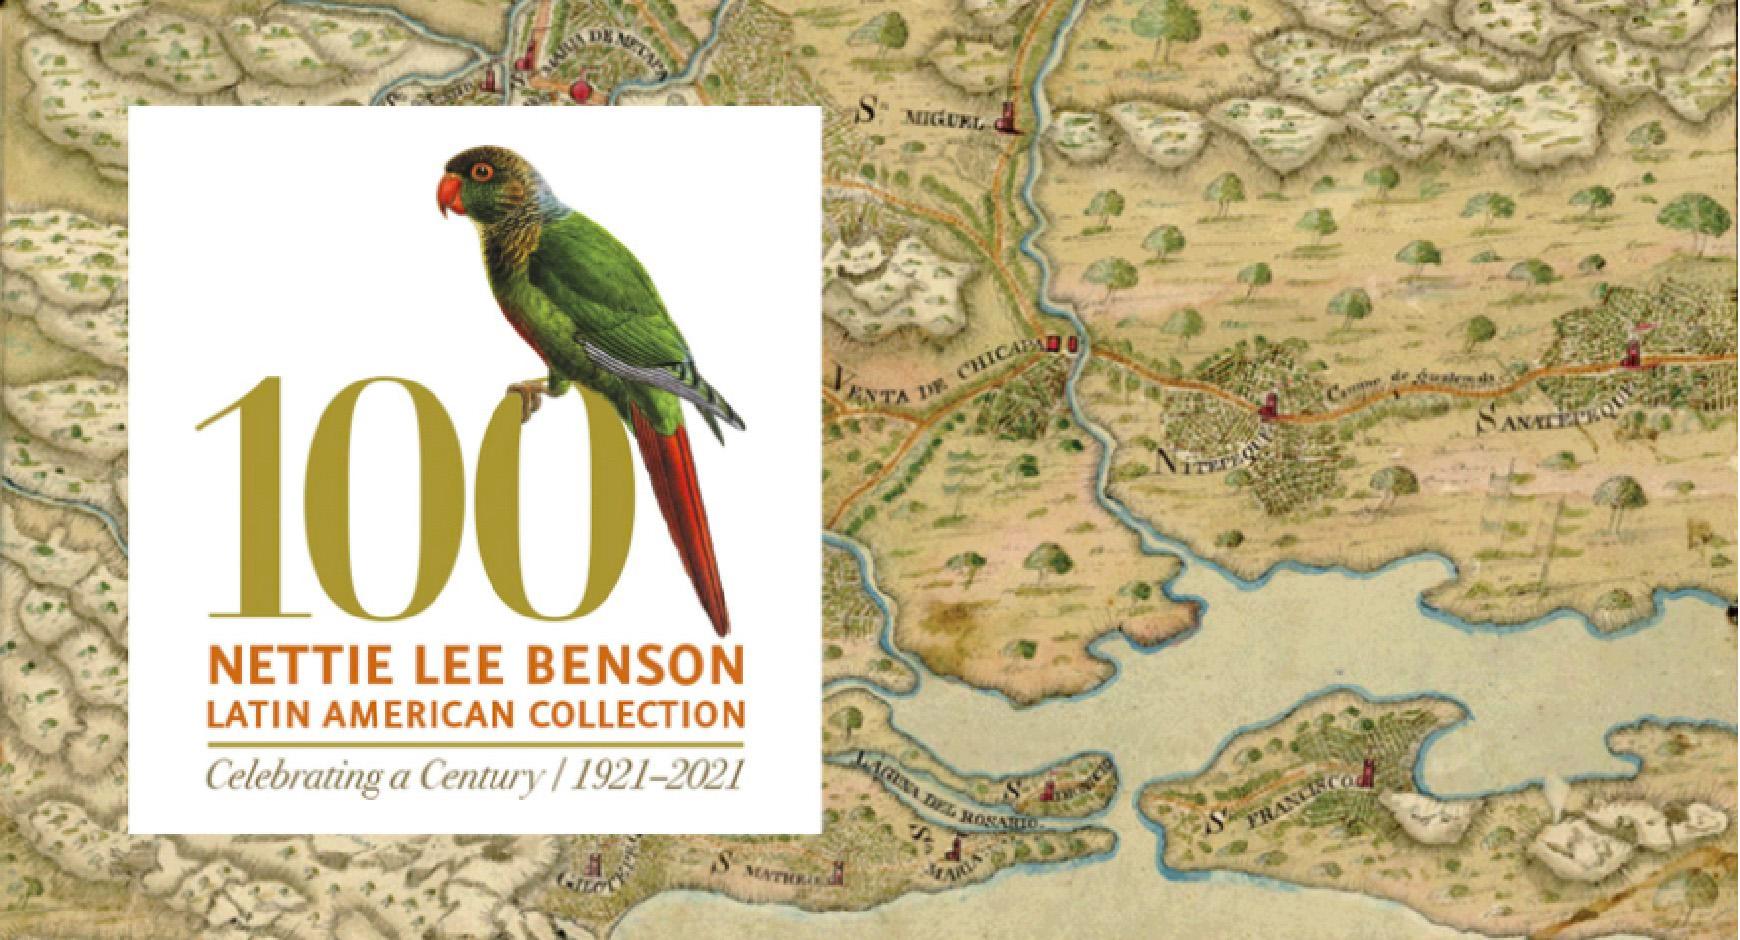 parrot lithograph with benson 100 graphic on historical map